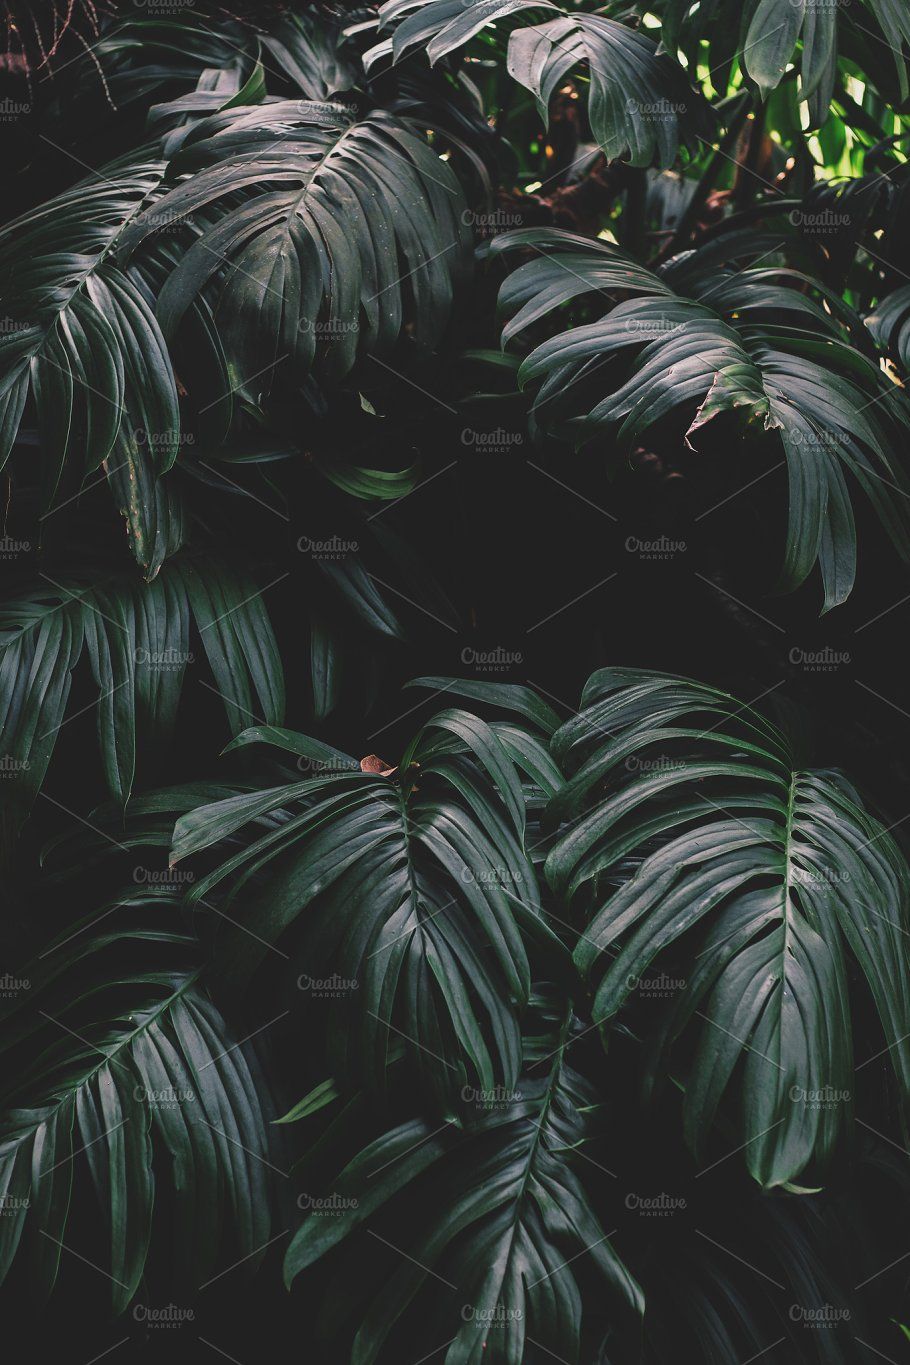 Dark green jungle leaves containing dark green, big tropical leaves, and. Nature photography, Jungle photography, Dark green aesthetic